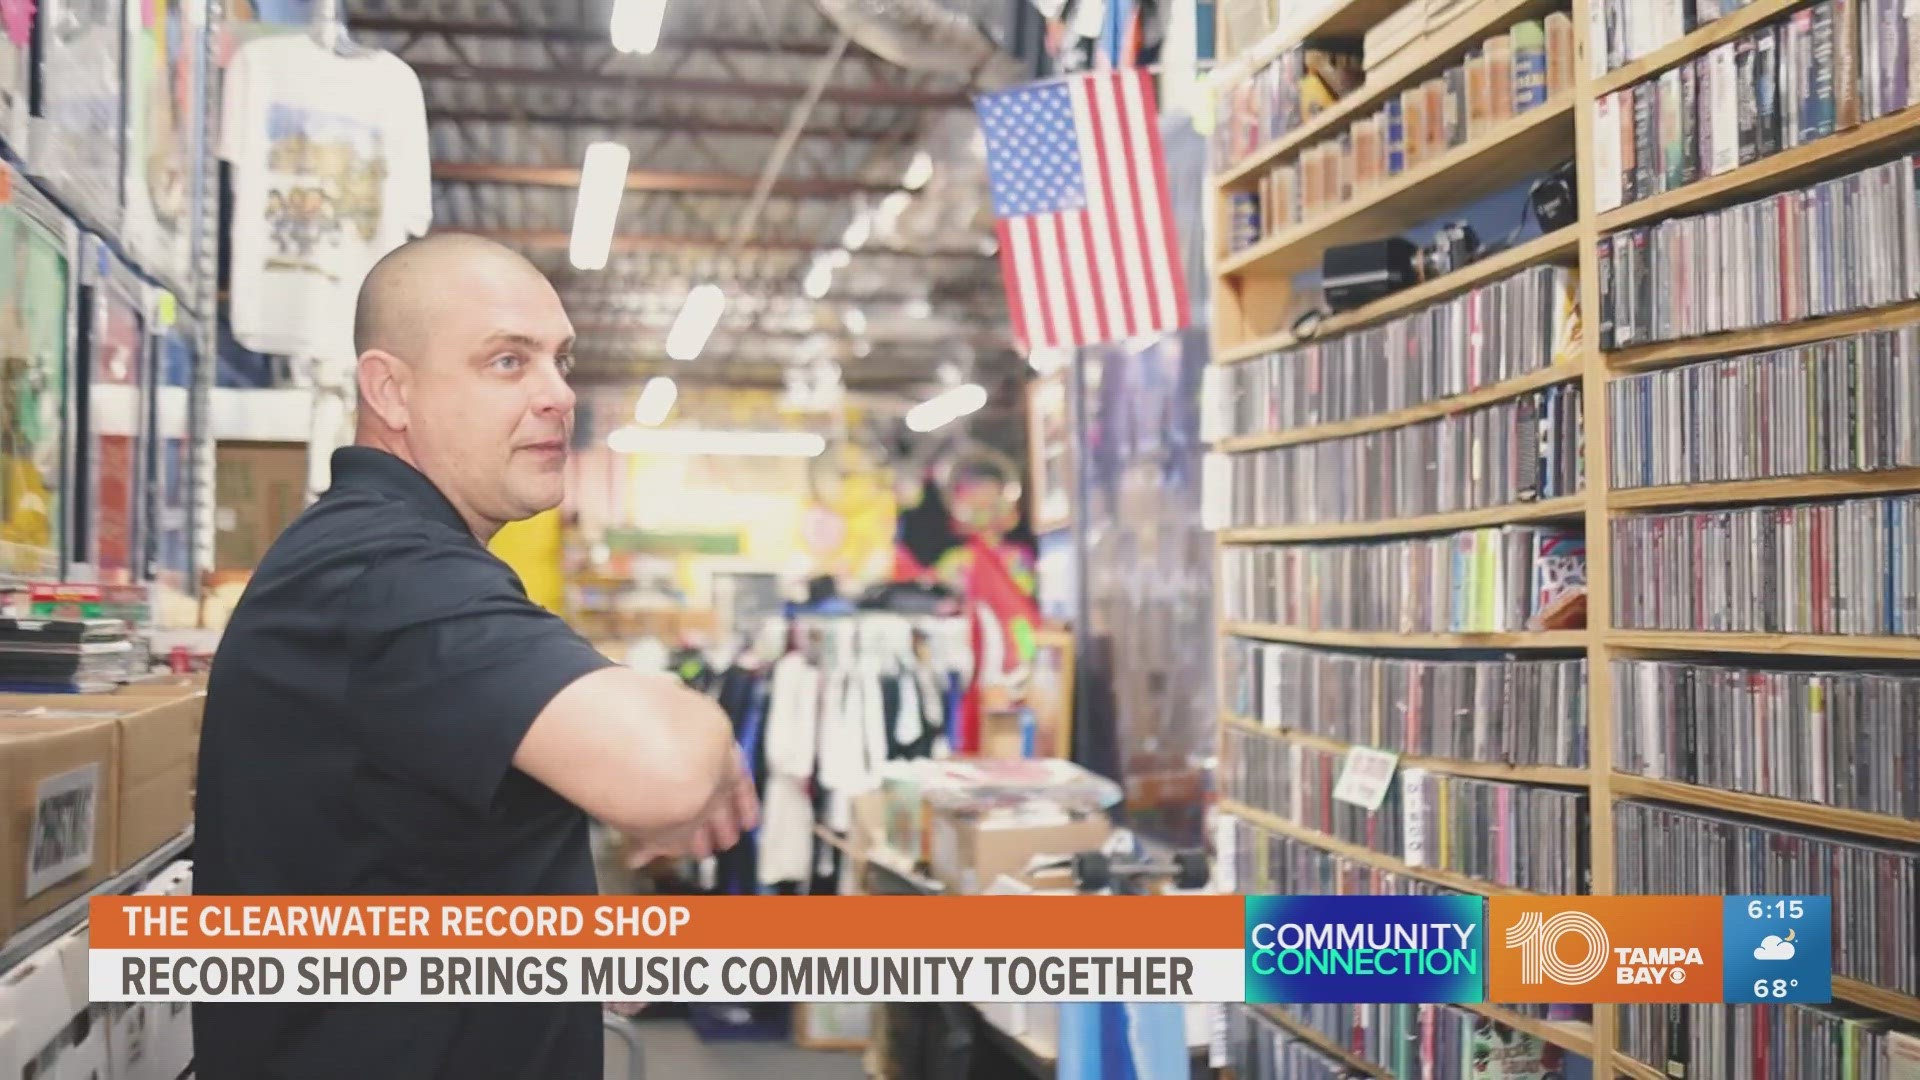 We look at some of the essential parts of our community. Today, Community Connection brings us to The Clearwater Record Shop